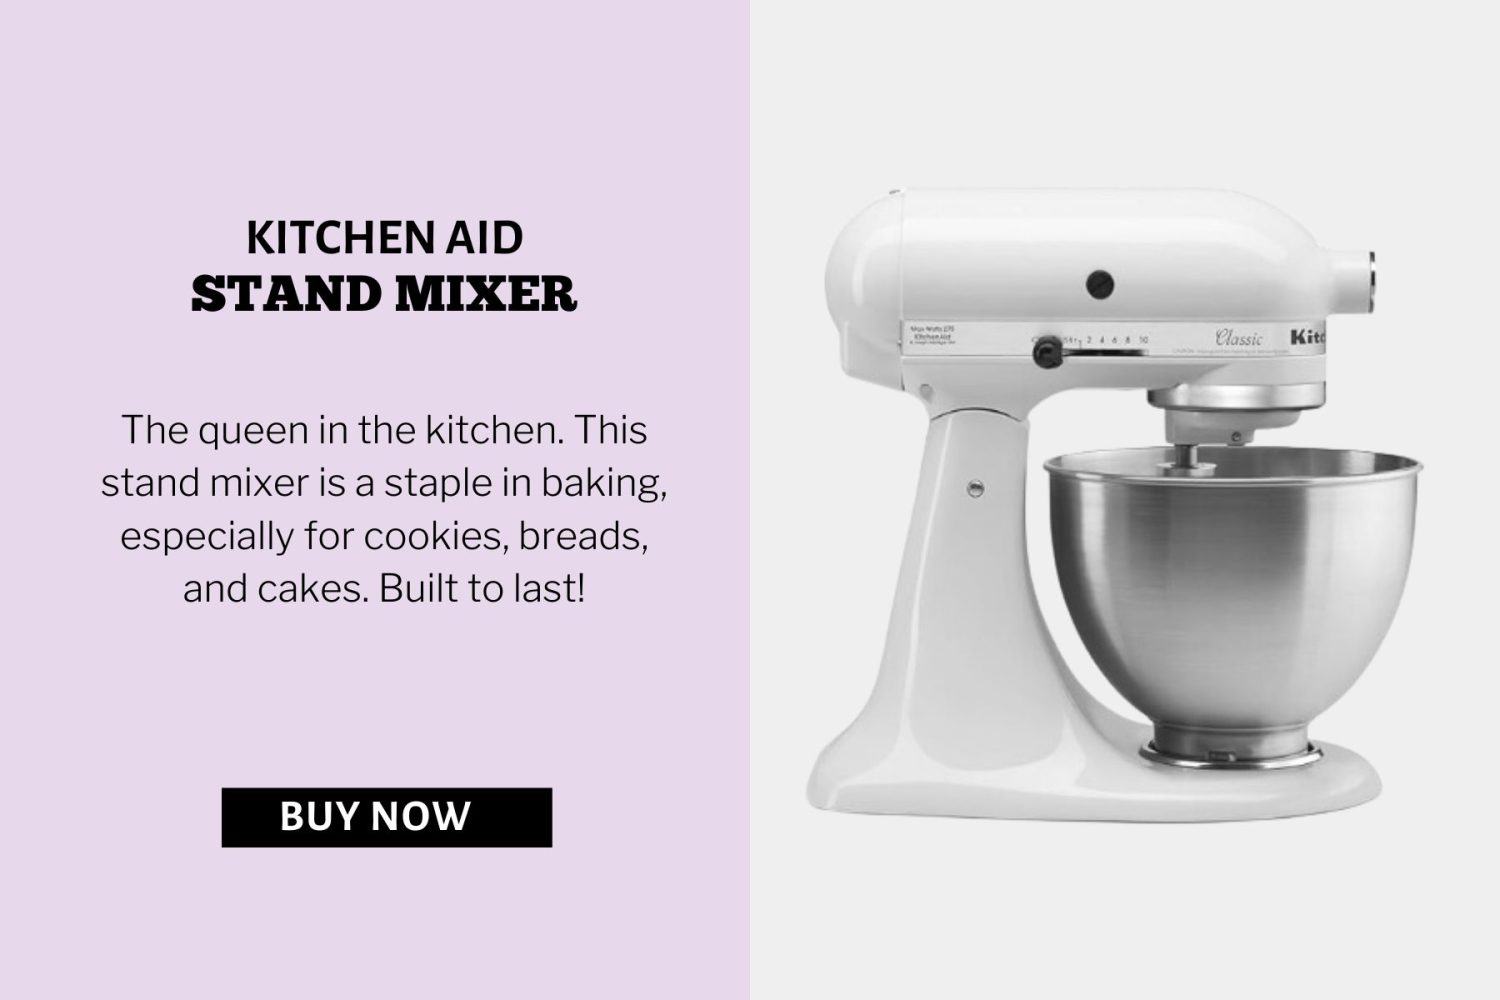 kitchen aid stand mixer product image.